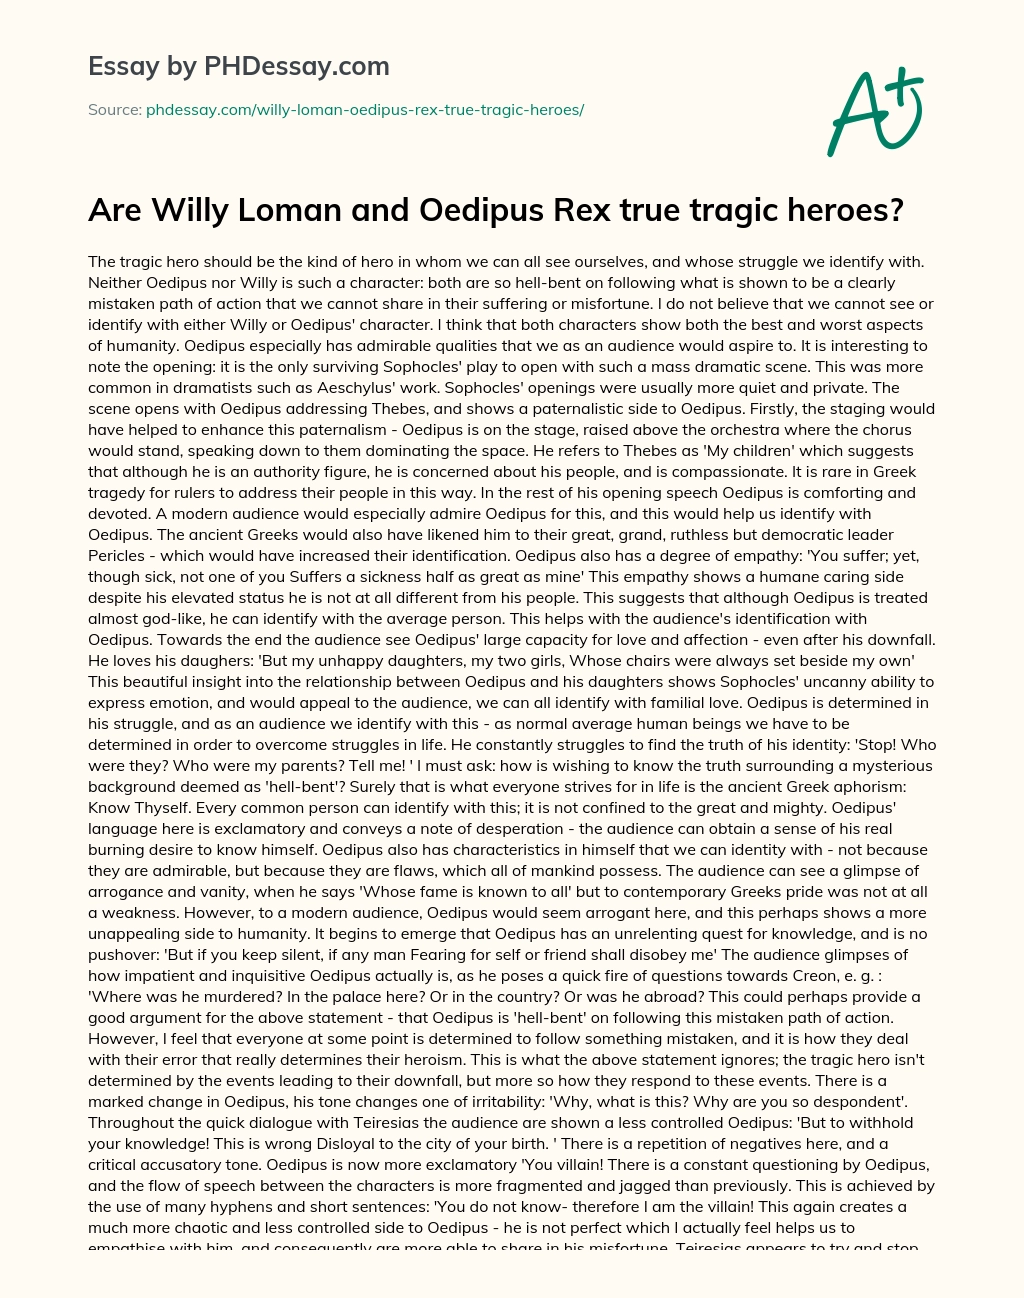 Are Willy Loman and Oedipus Rex true tragic heroes? essay